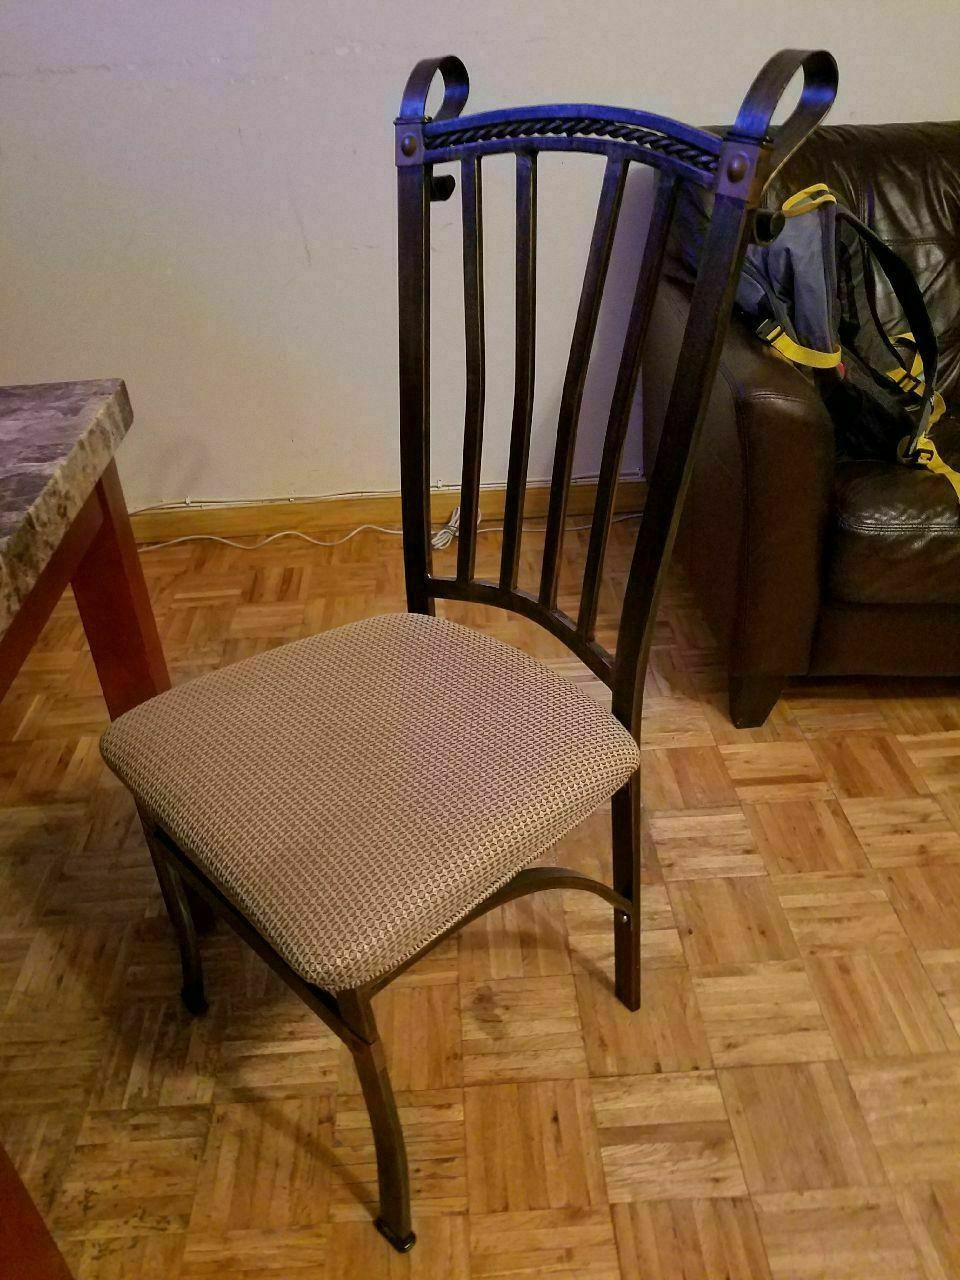 4 Antique chairs